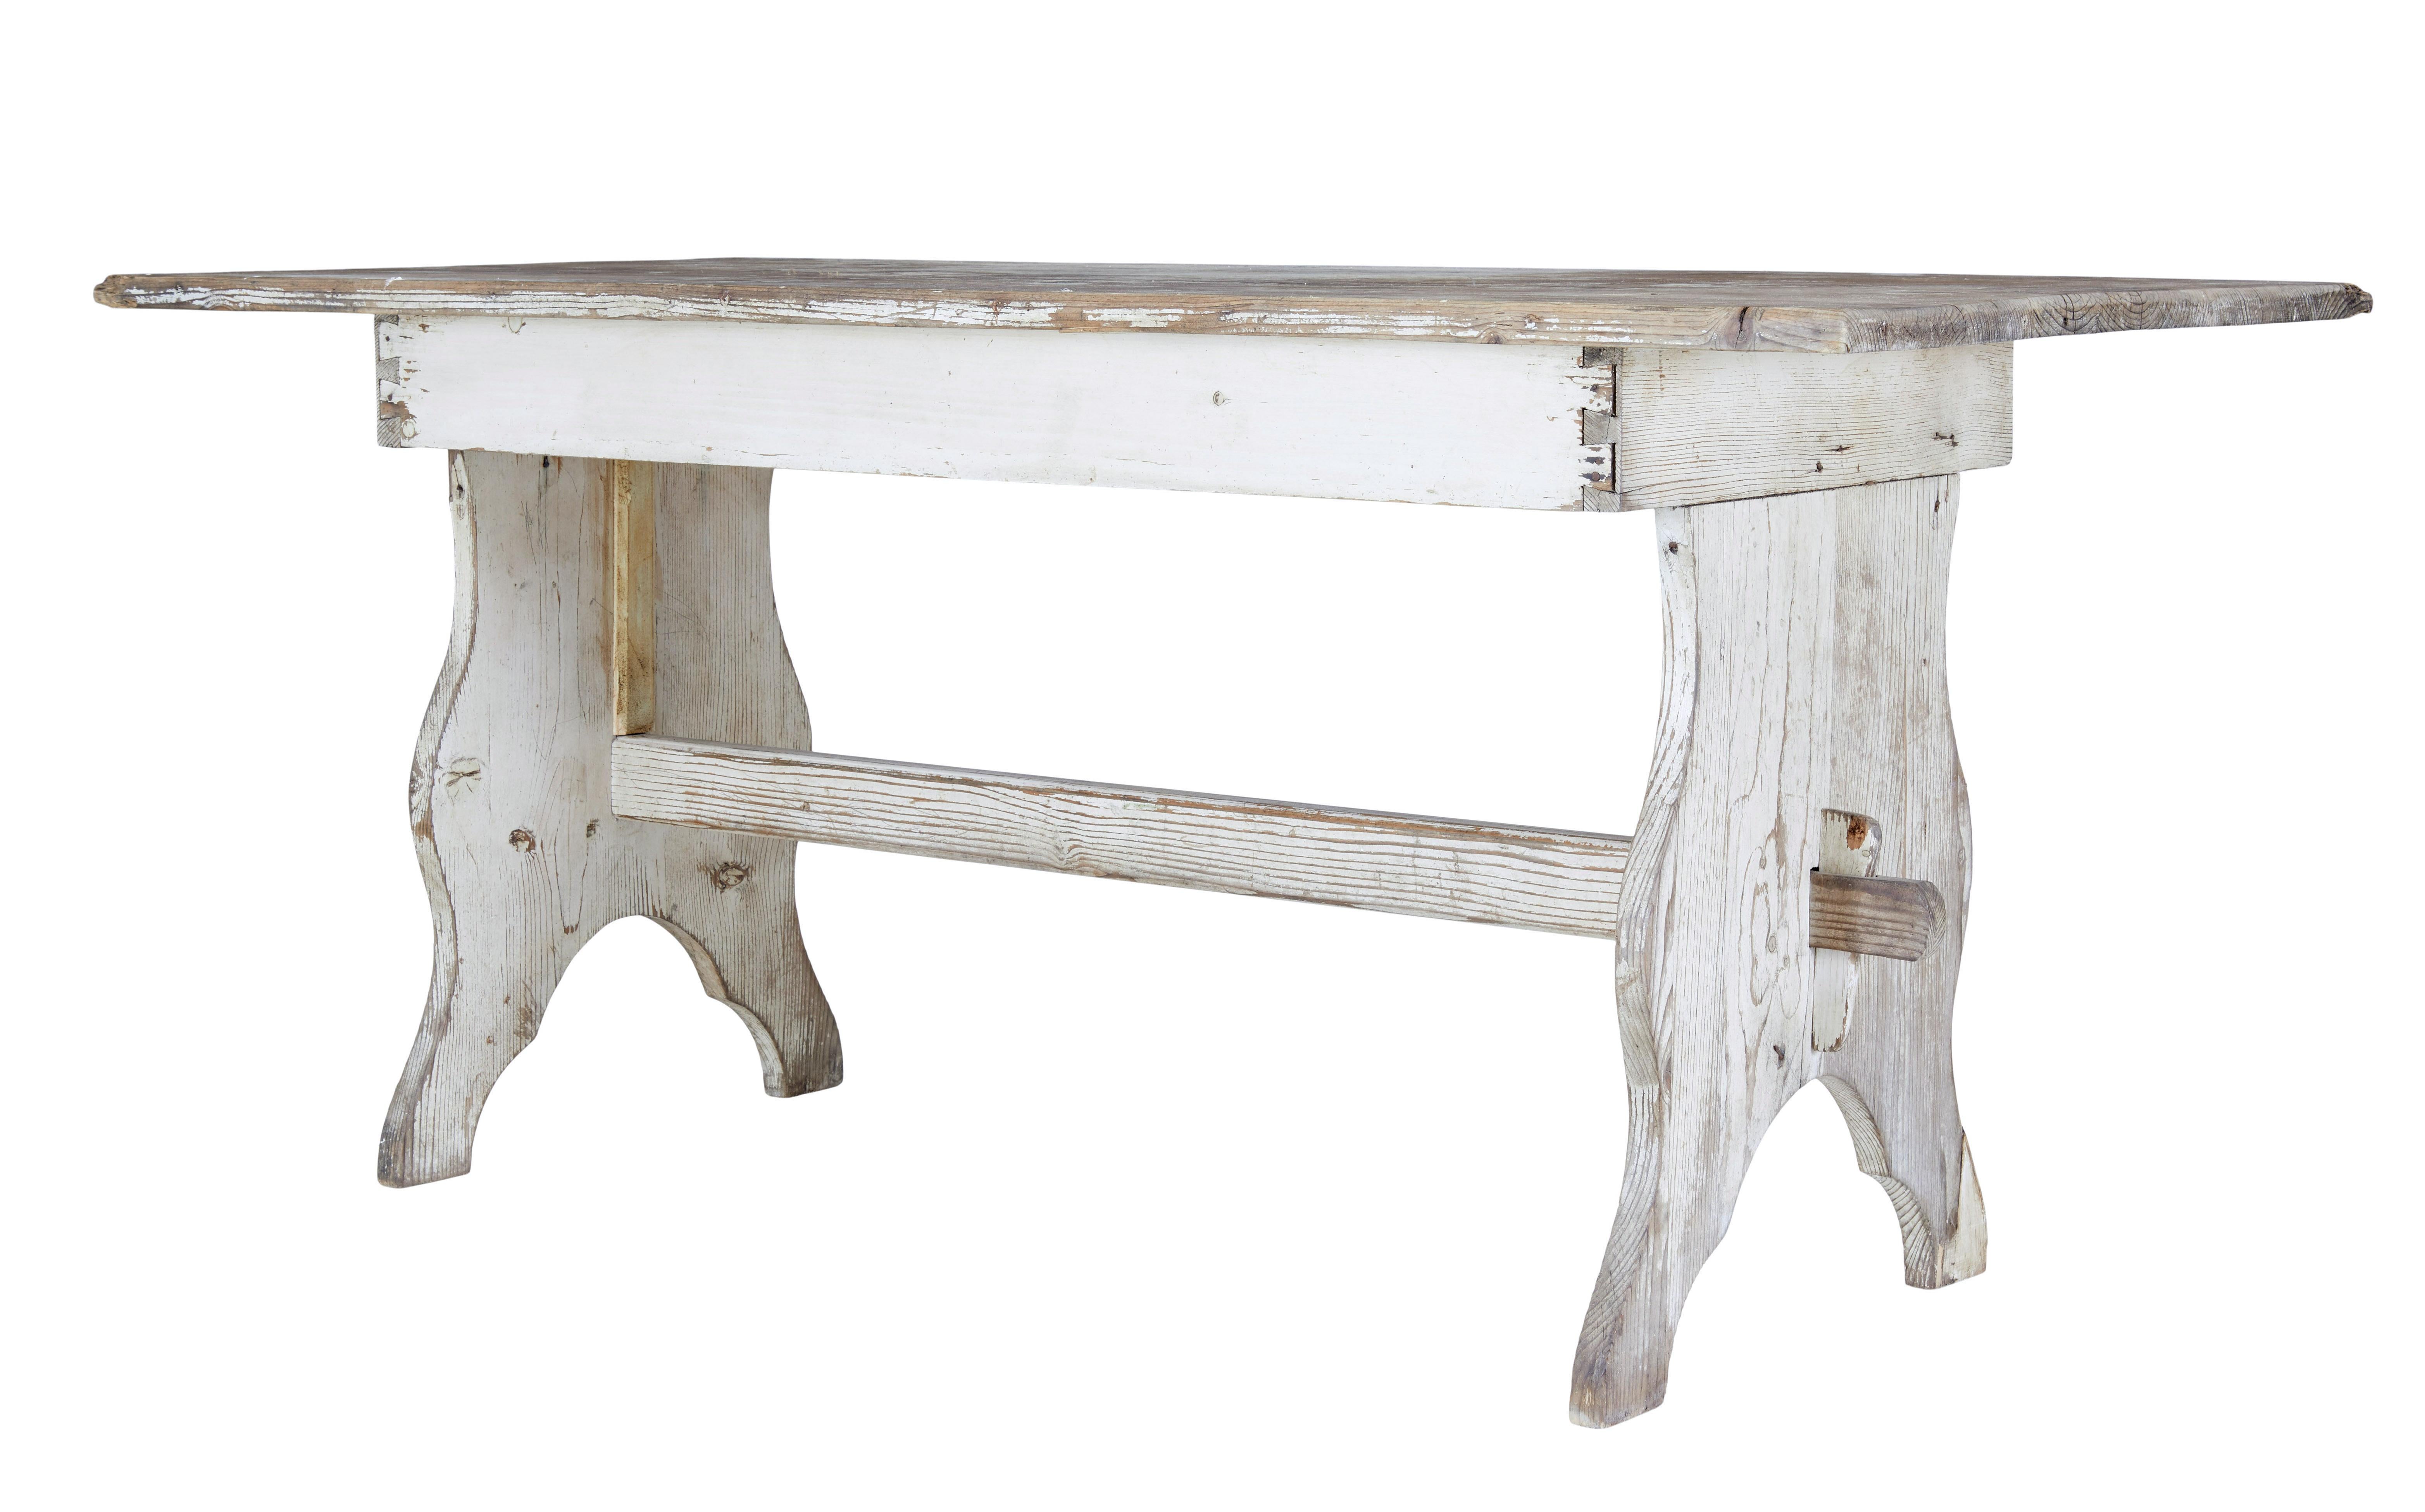 19th Century scandinavian painted pine dining table circa 1880.

Good quality swedish pine trestle end table, which could be used for dining or as a desk.

Rectangular pine plank top with traces of original paint, supported by a dove tailed